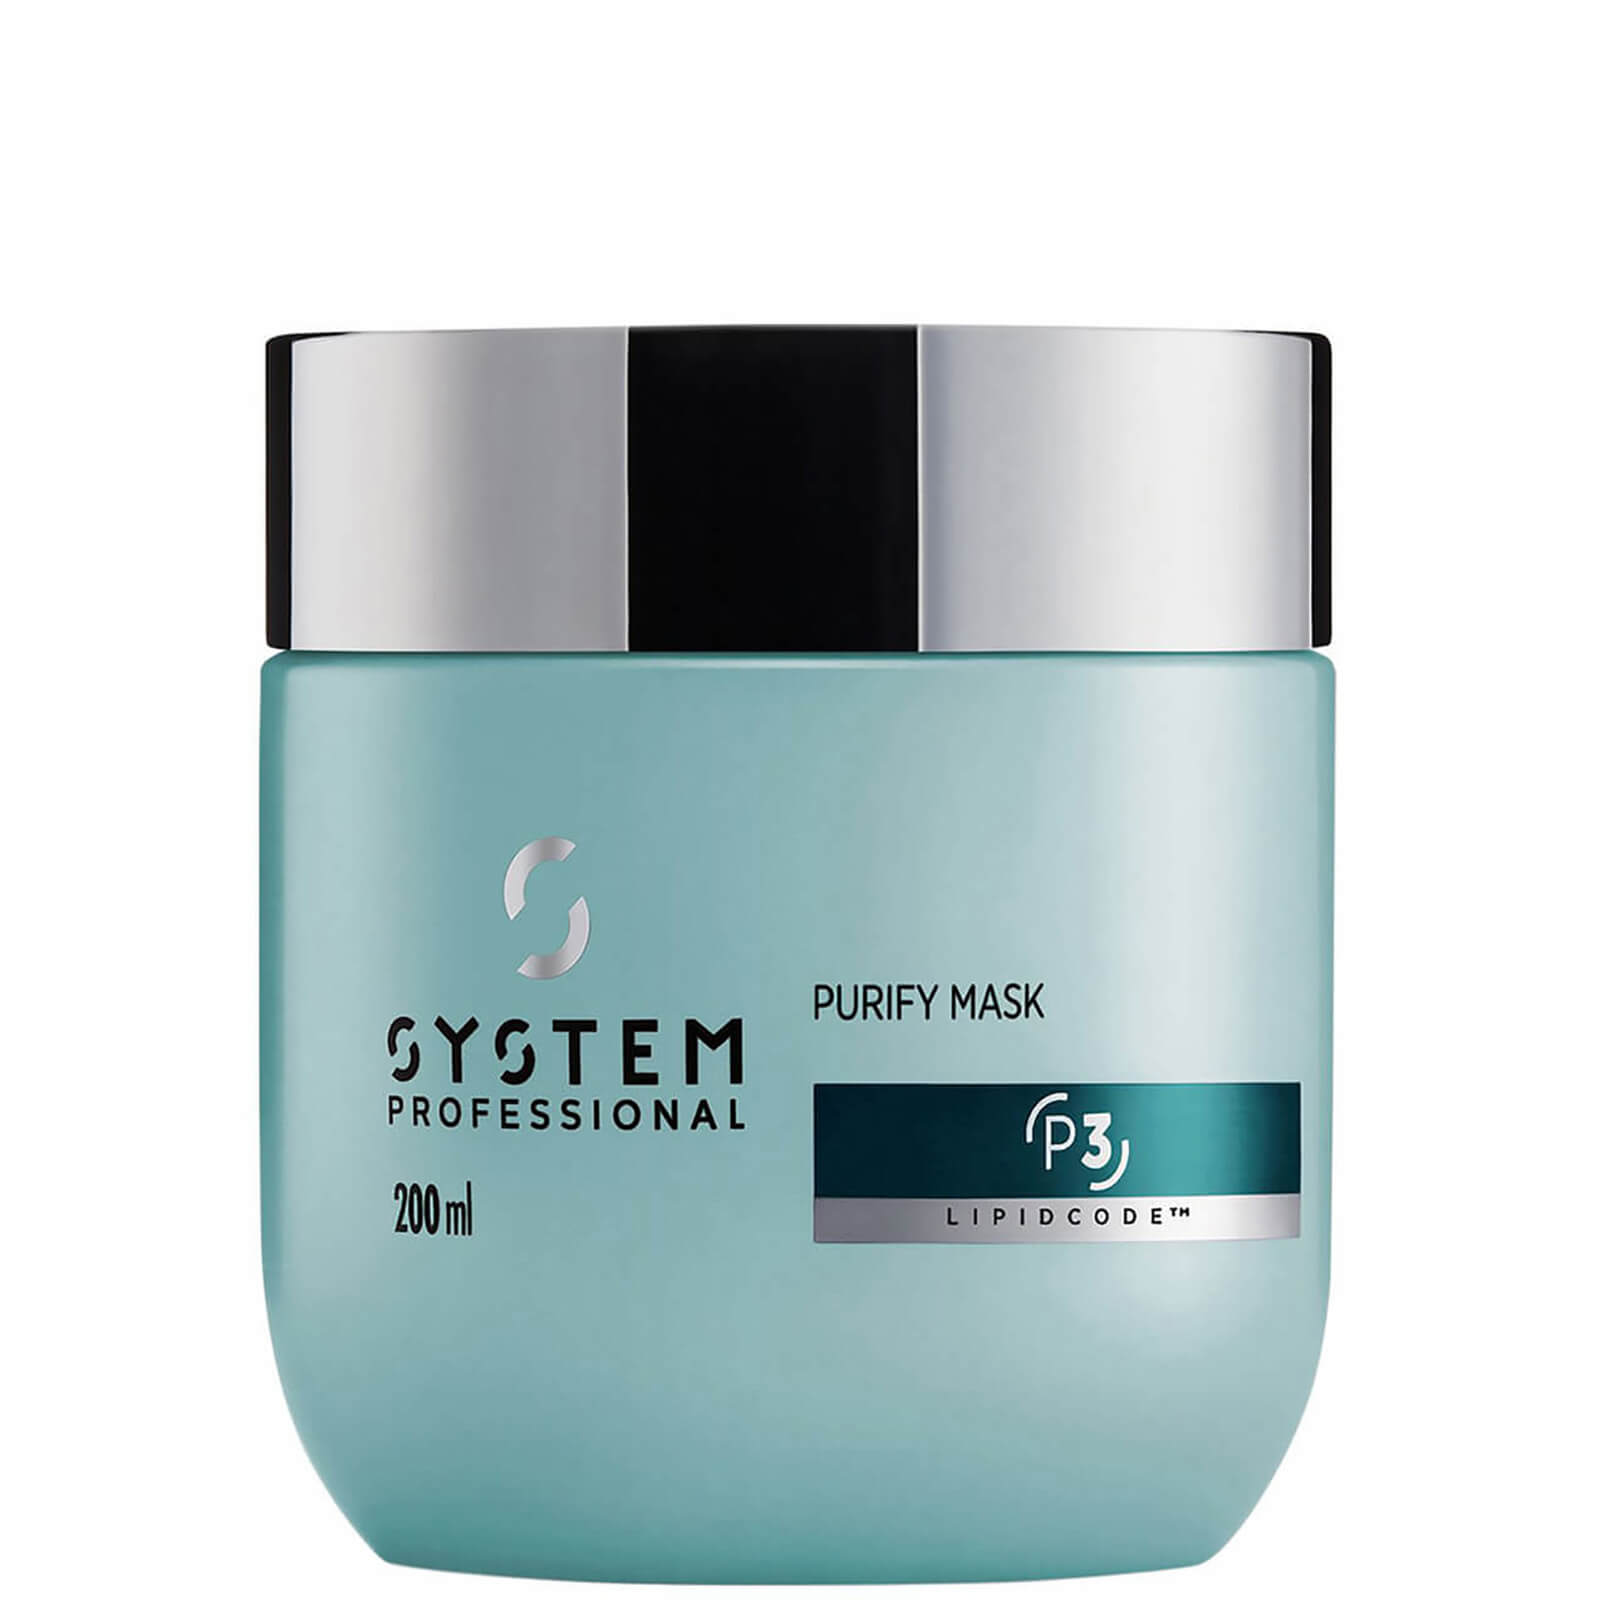 System Professional Purify Mask 200 ml von System Professional